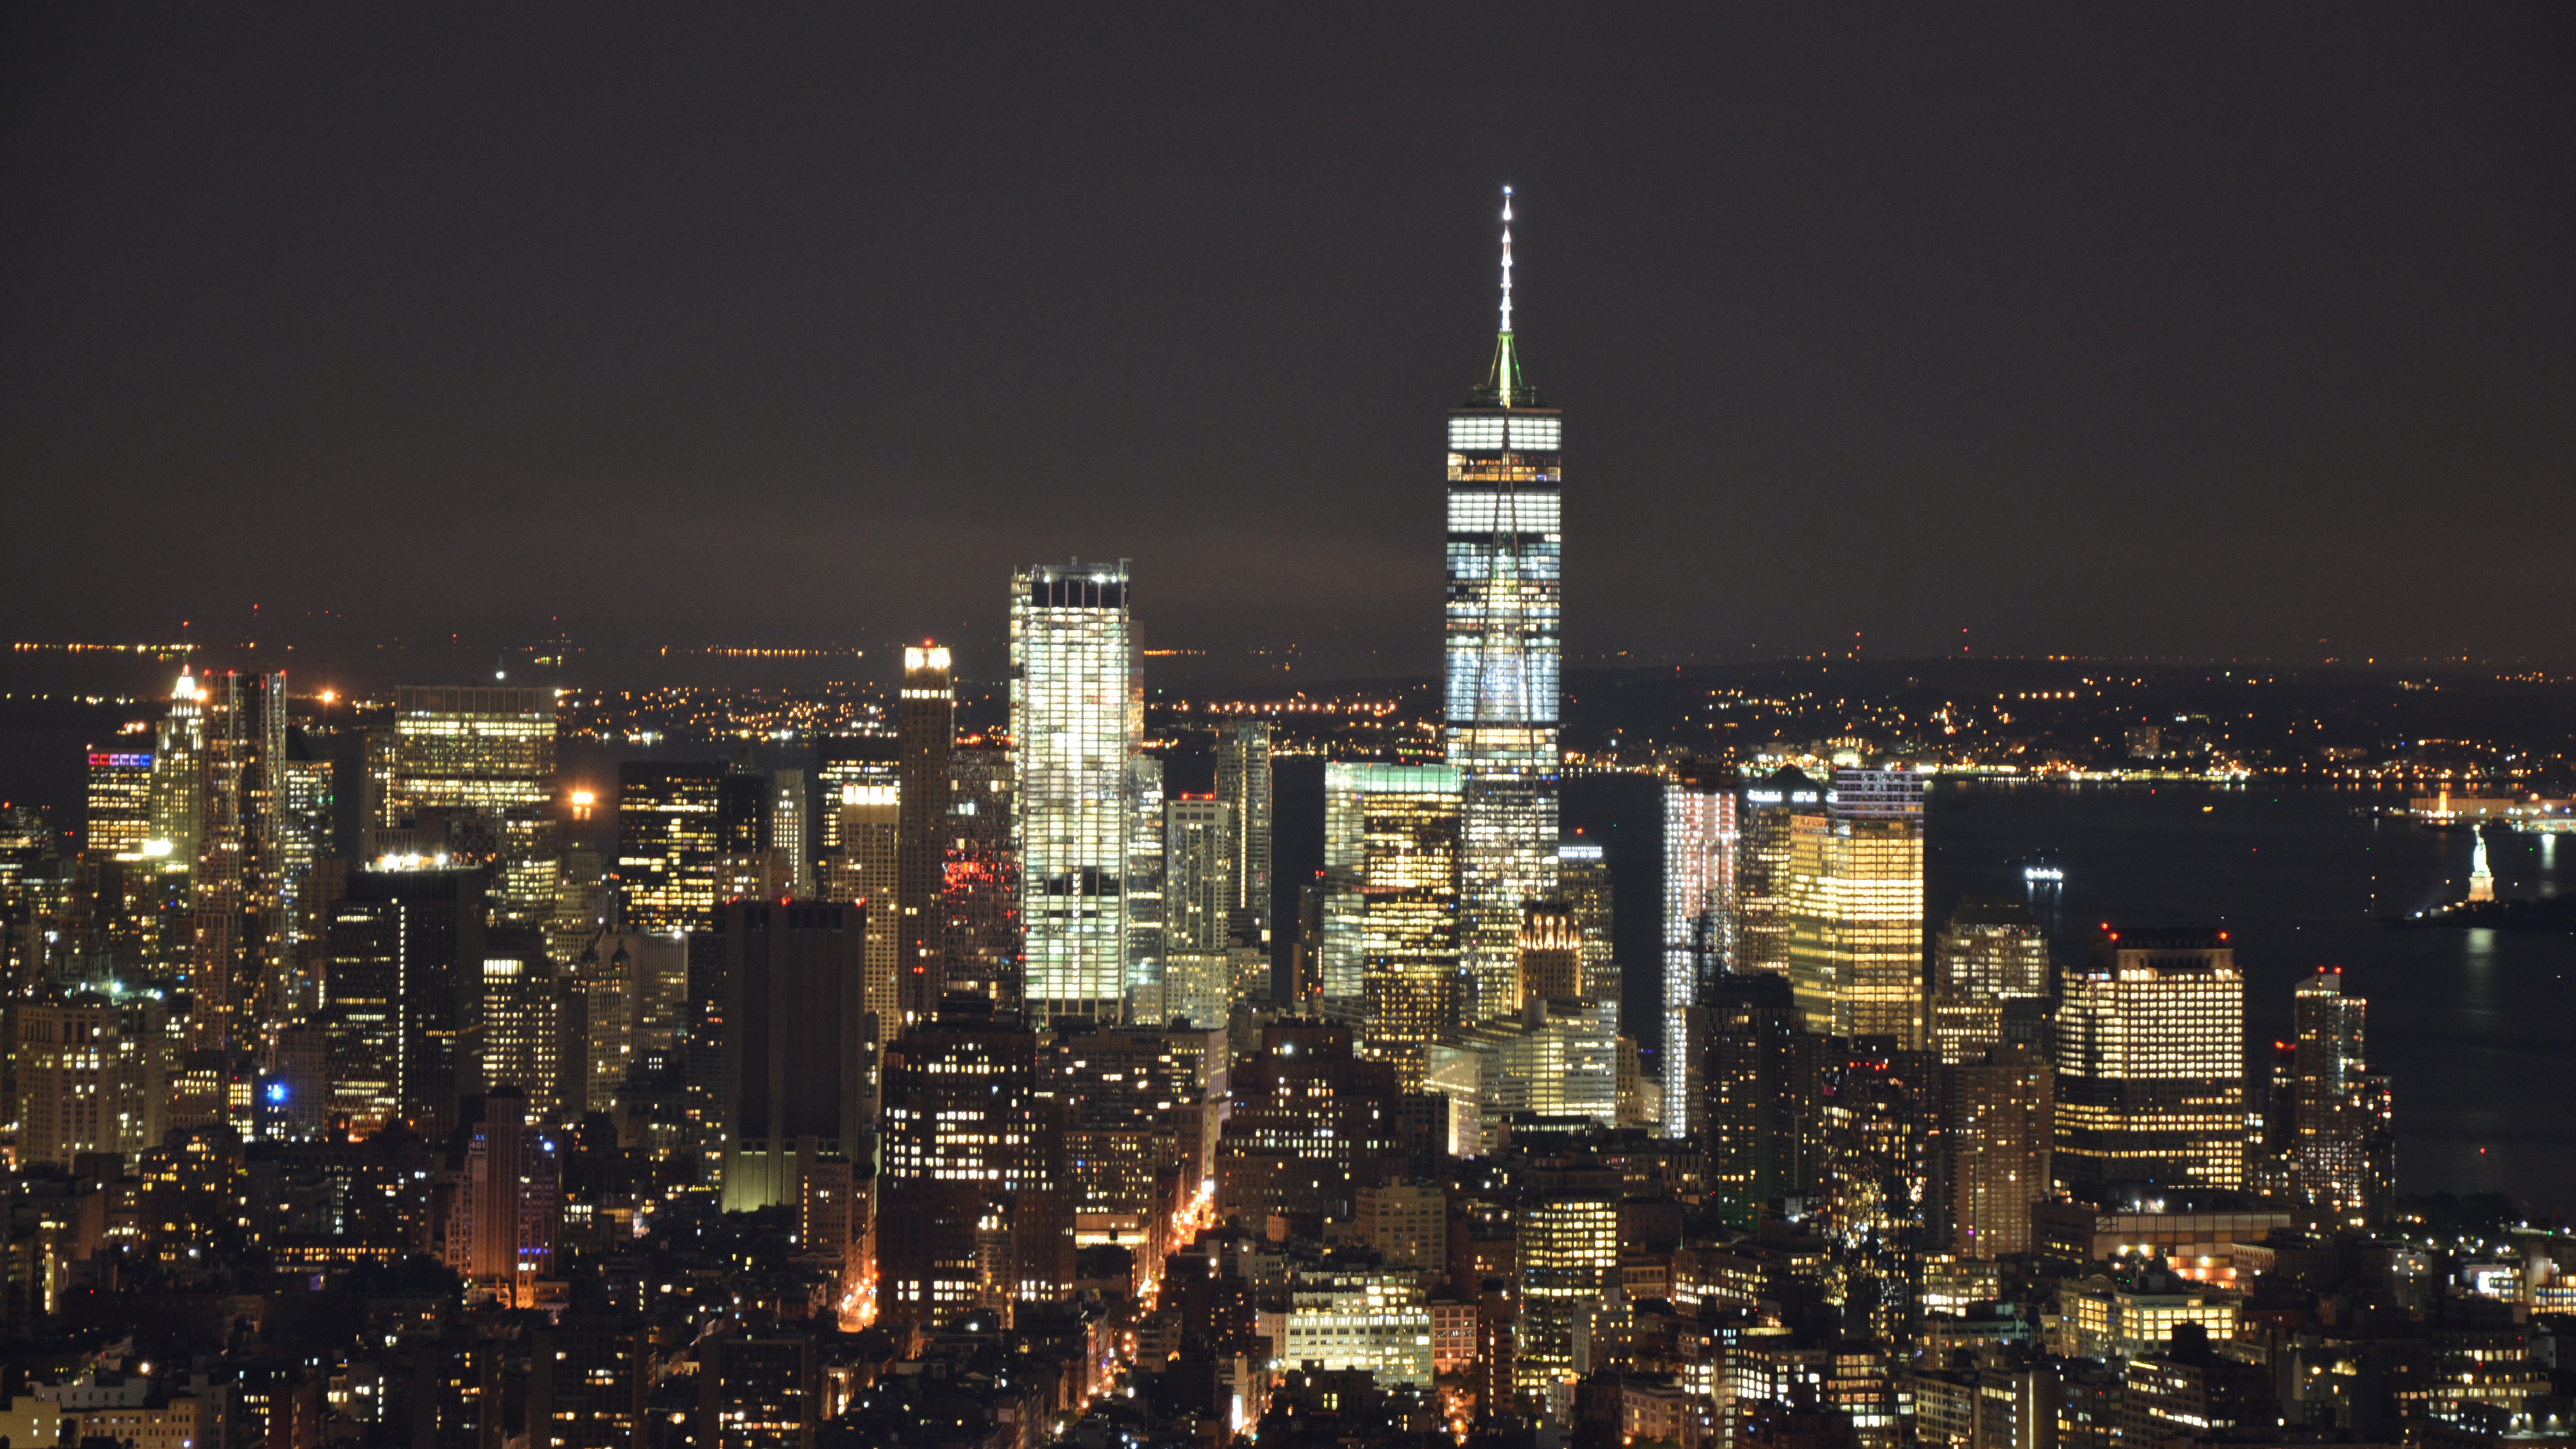 Artificial nighttime lighting (here, in Manhattan’s World Trade Center area) attracts night-migrating birds, causing them to stray from their natural migration paths. The birds then may become disoriented and collide with glass windows, either at night or in the morning. Photo: alpe89/CC BY-NC-ND 2.0